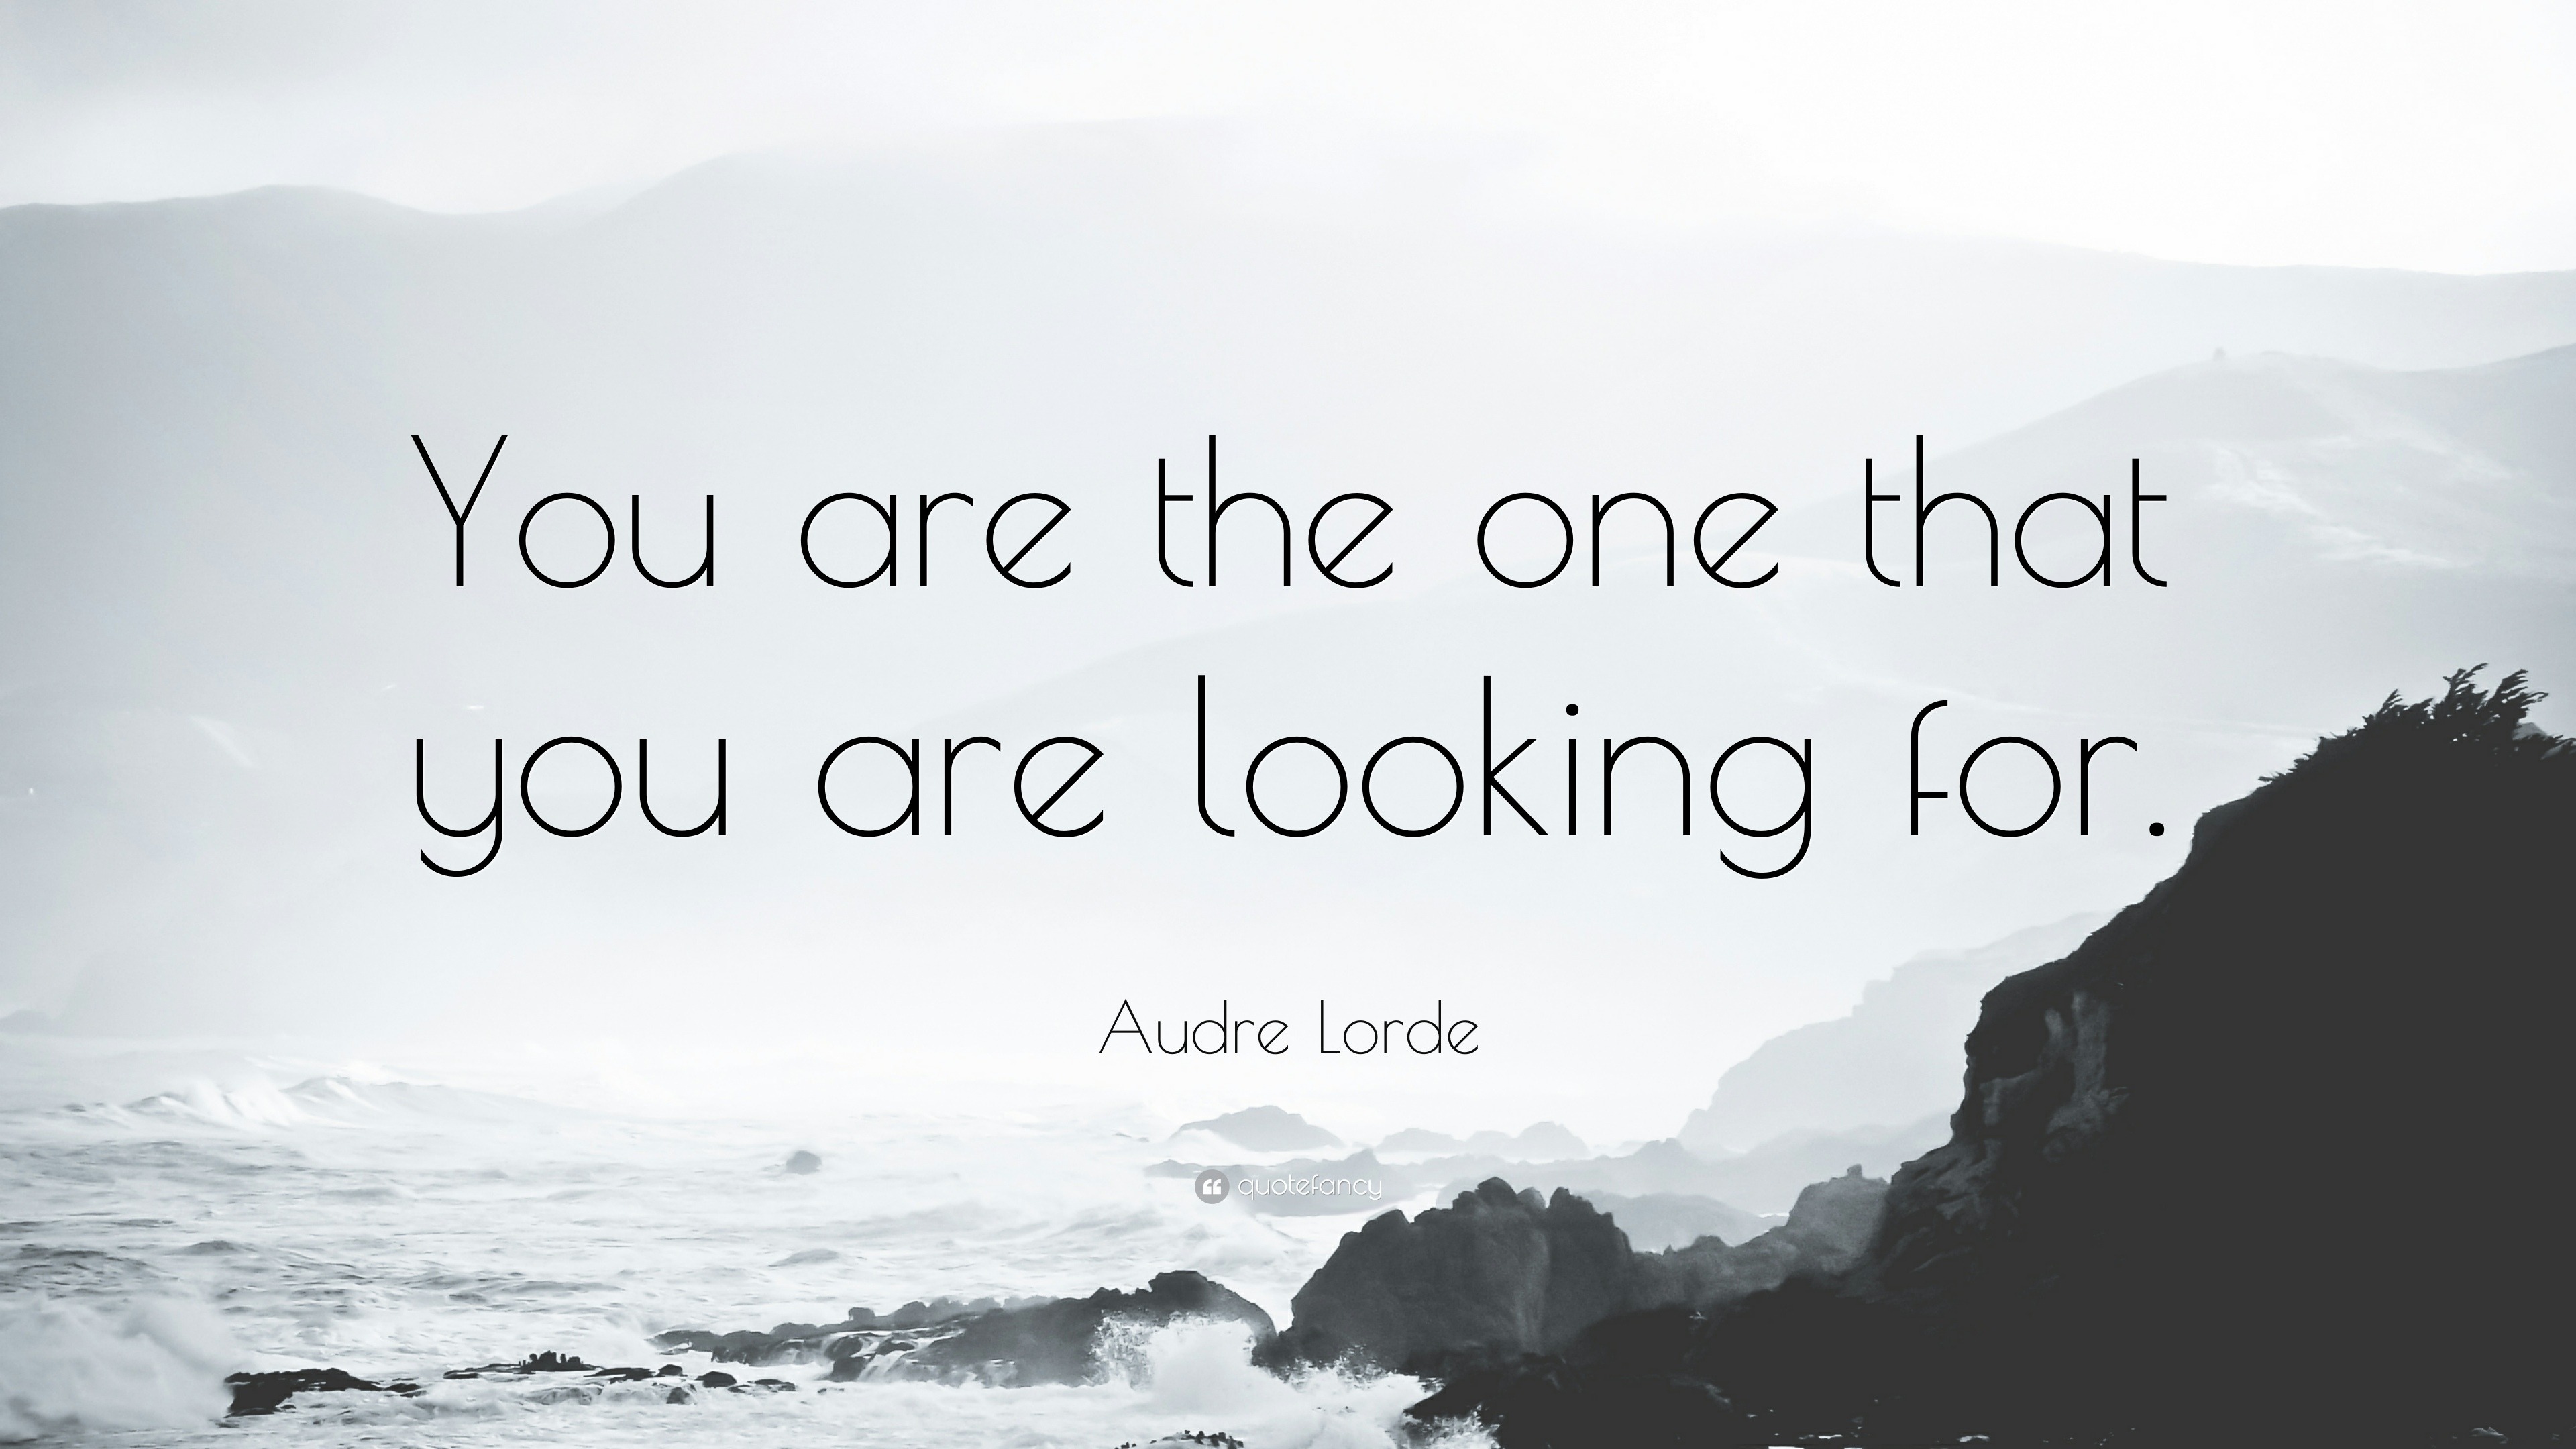 Audre Lorde Quote: You are the one that you are looking for